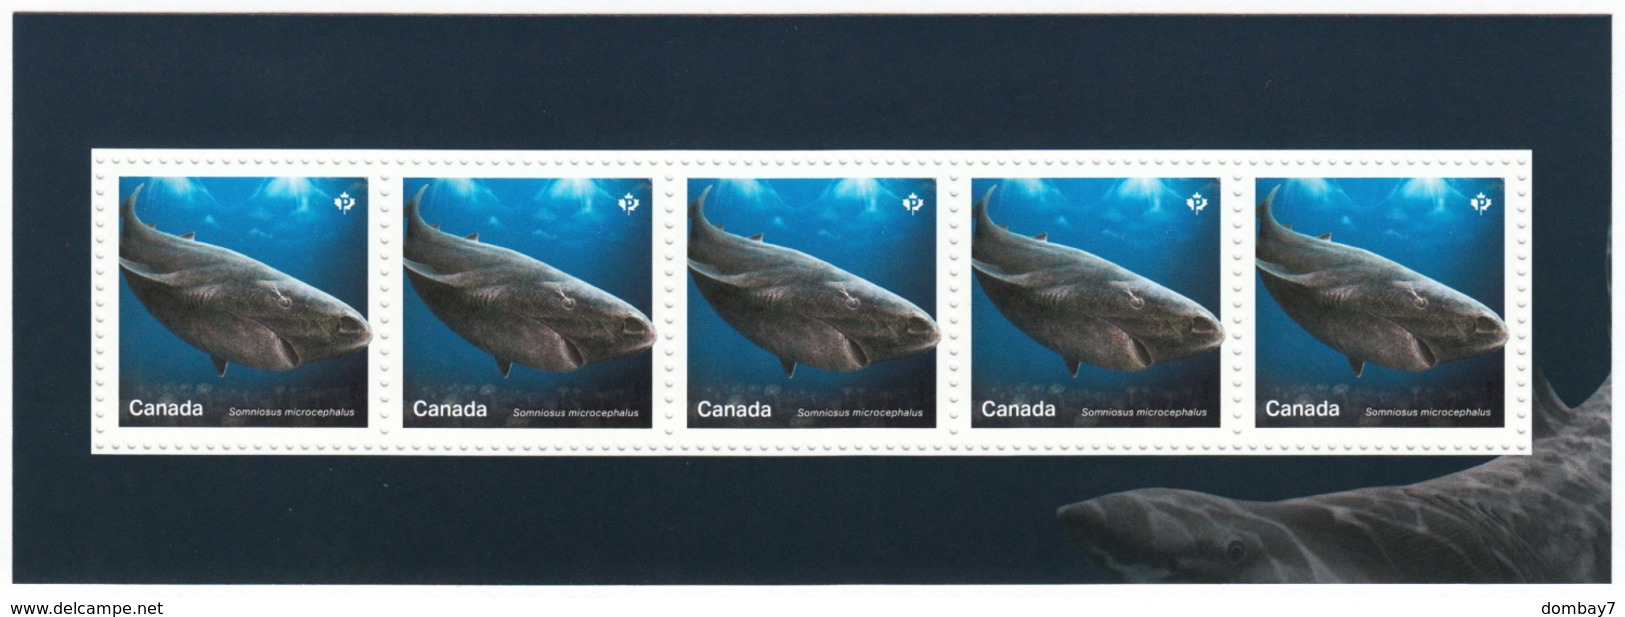 = SHARKS In Canadian Waters = HAIFISCH = REQUIN = Tiburón = SQUALO = 5 Souvenir Sheets From Uncut Sheet Canada 2018 - Vie Marine